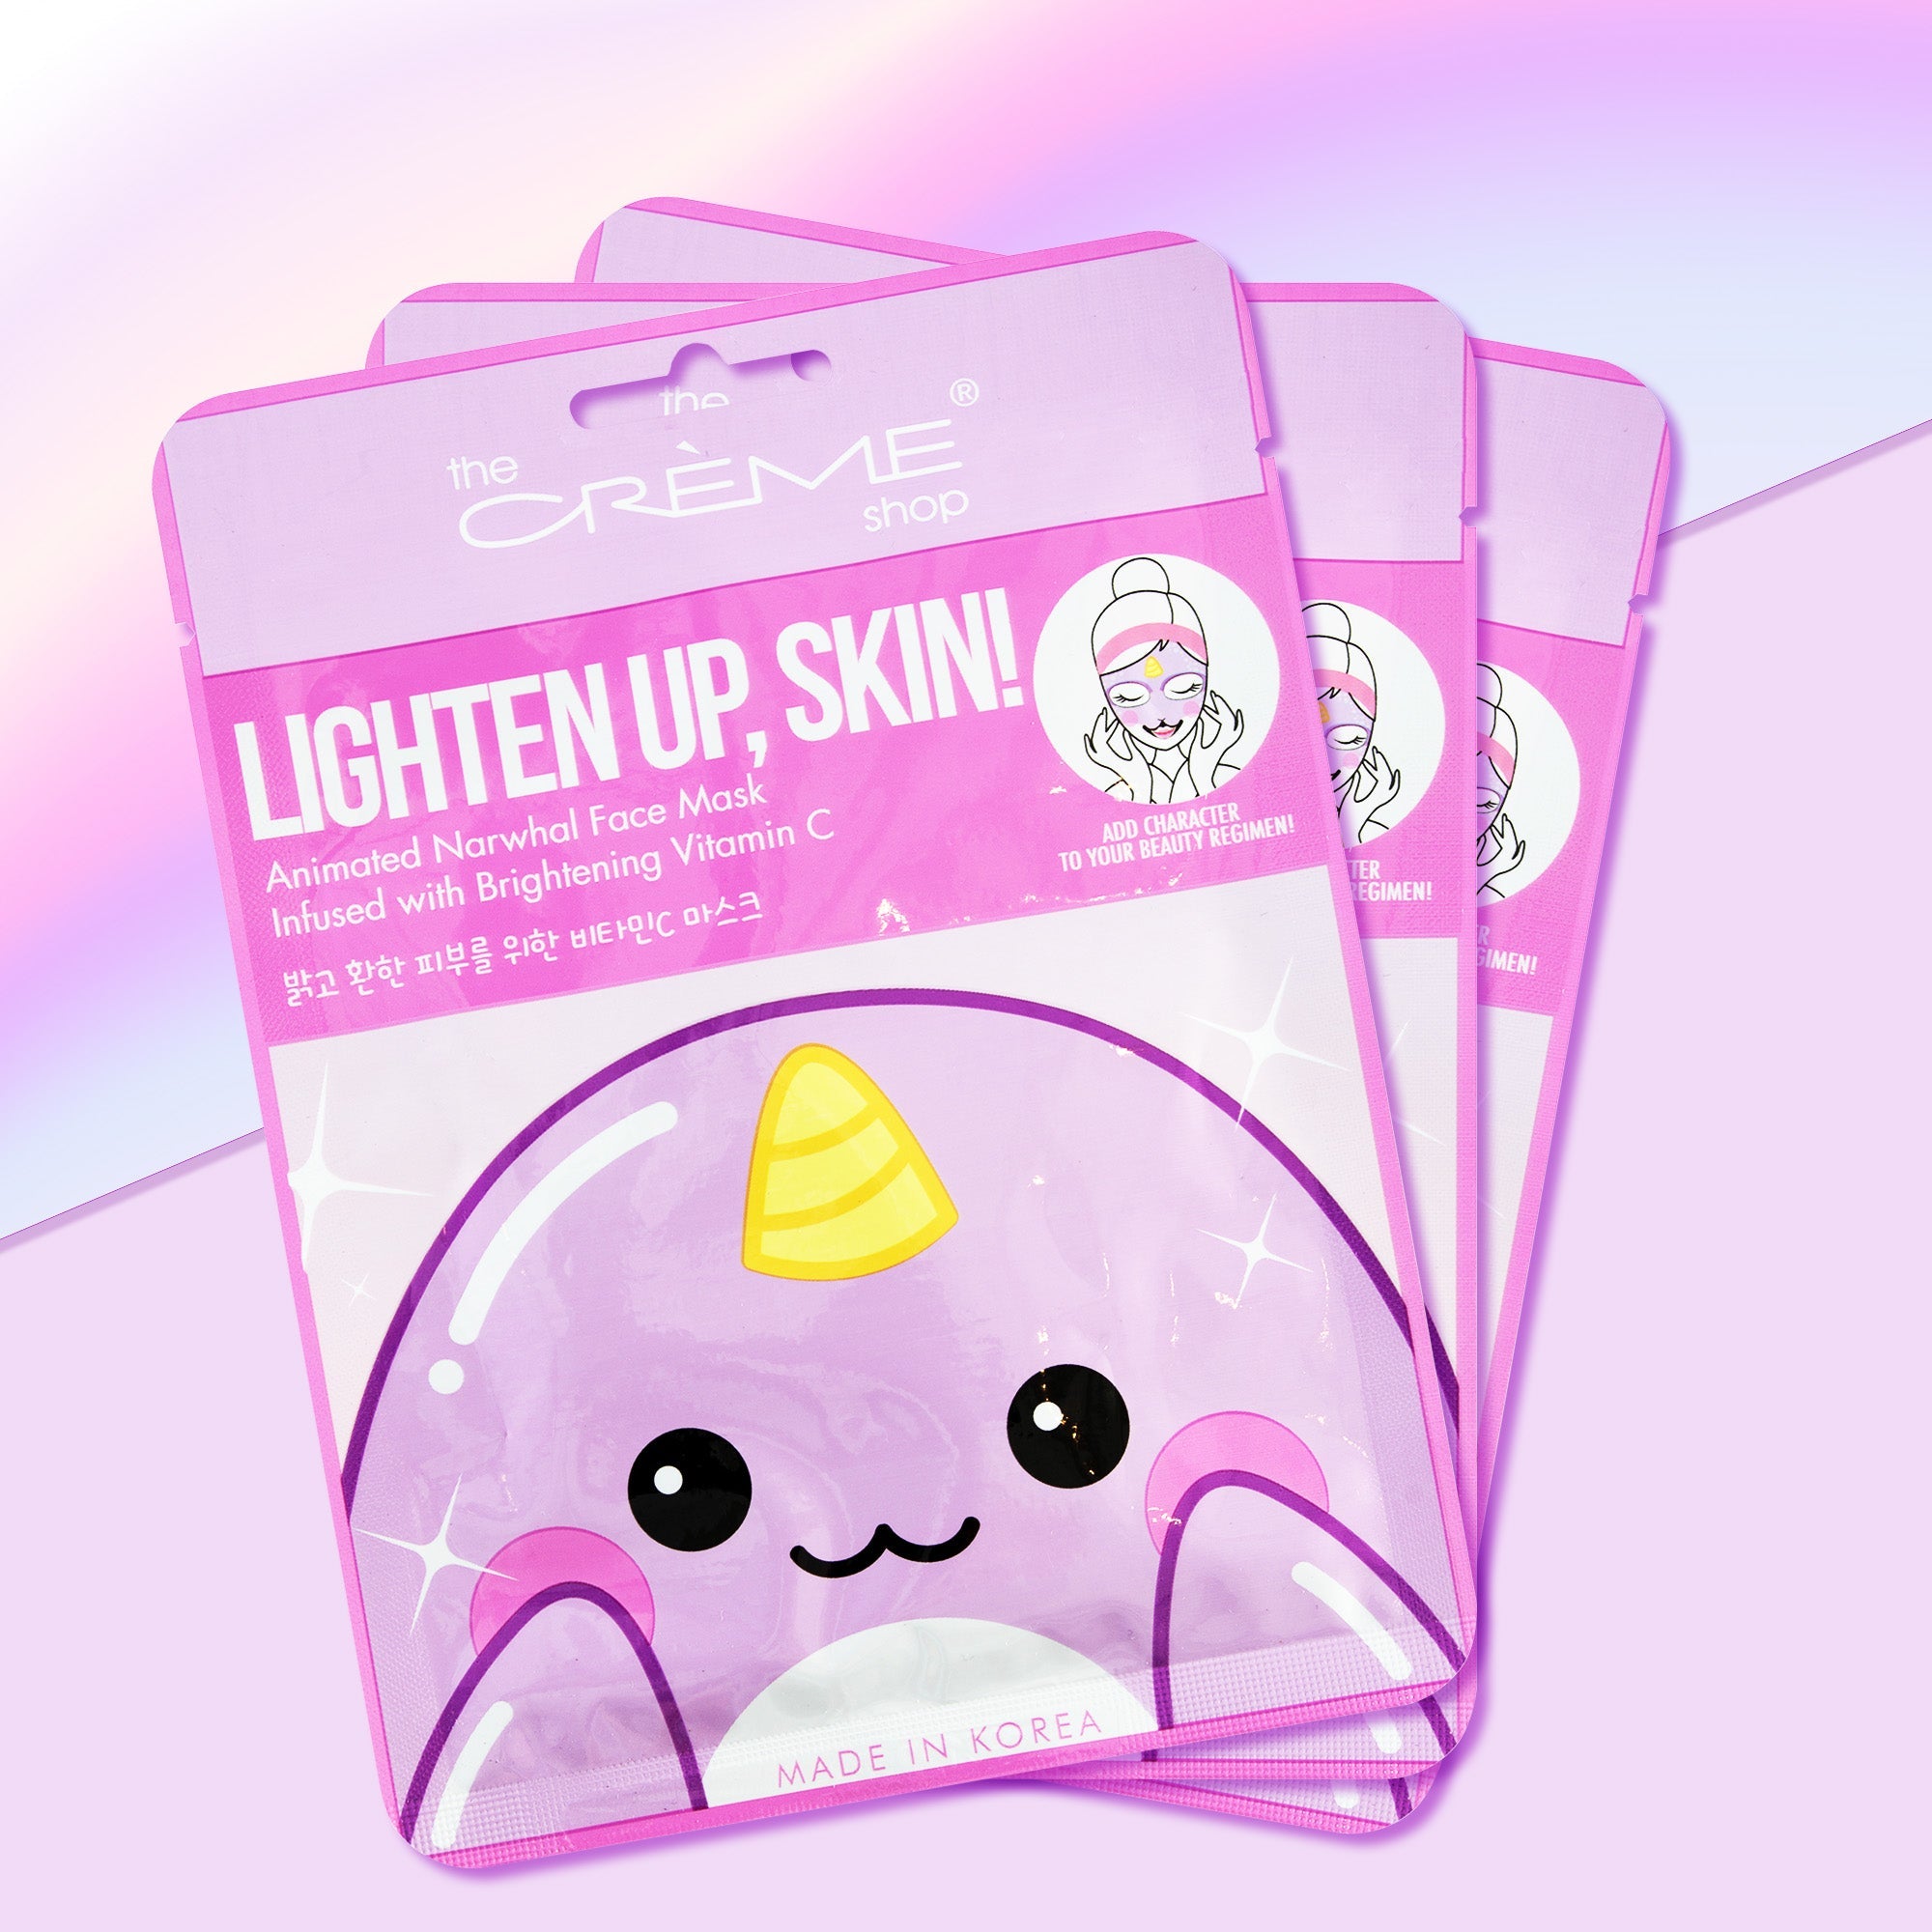 Lighten Up, Skin! Animated Narwhal Face Mask - Brightening Vitamin C Animated Sheet Masks - The Crème Shop 